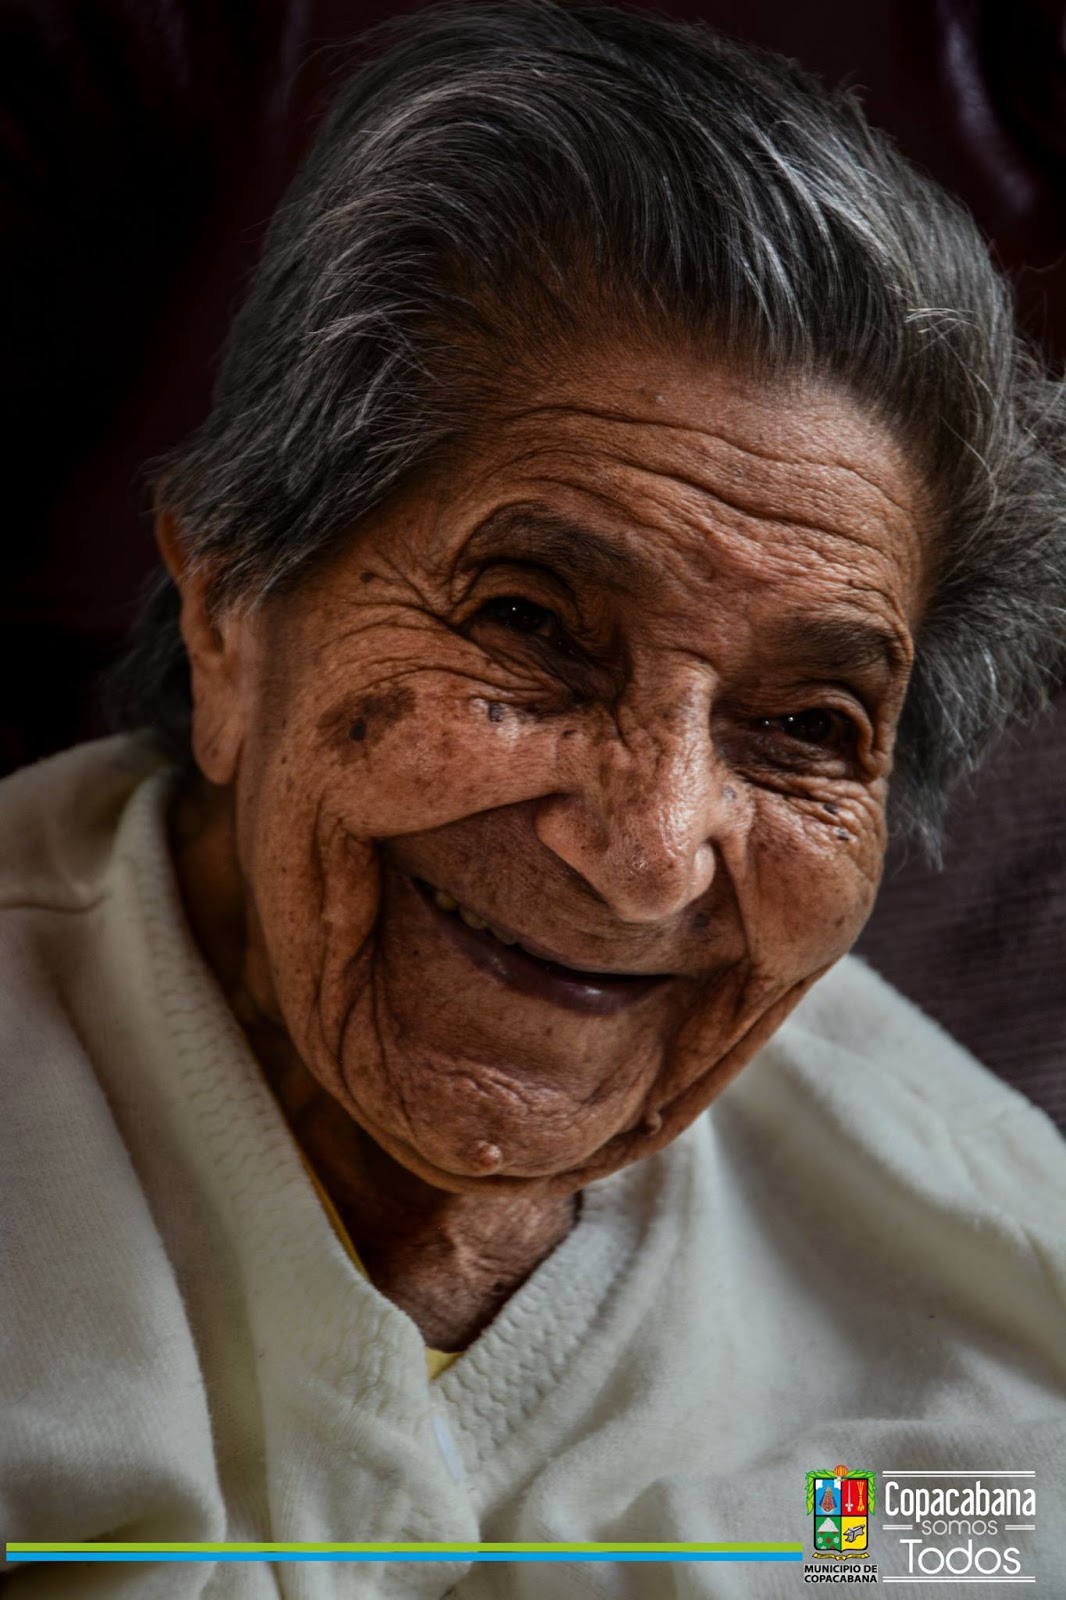 In July 2017, aged 106. (Source: Lasnoticiasenred)